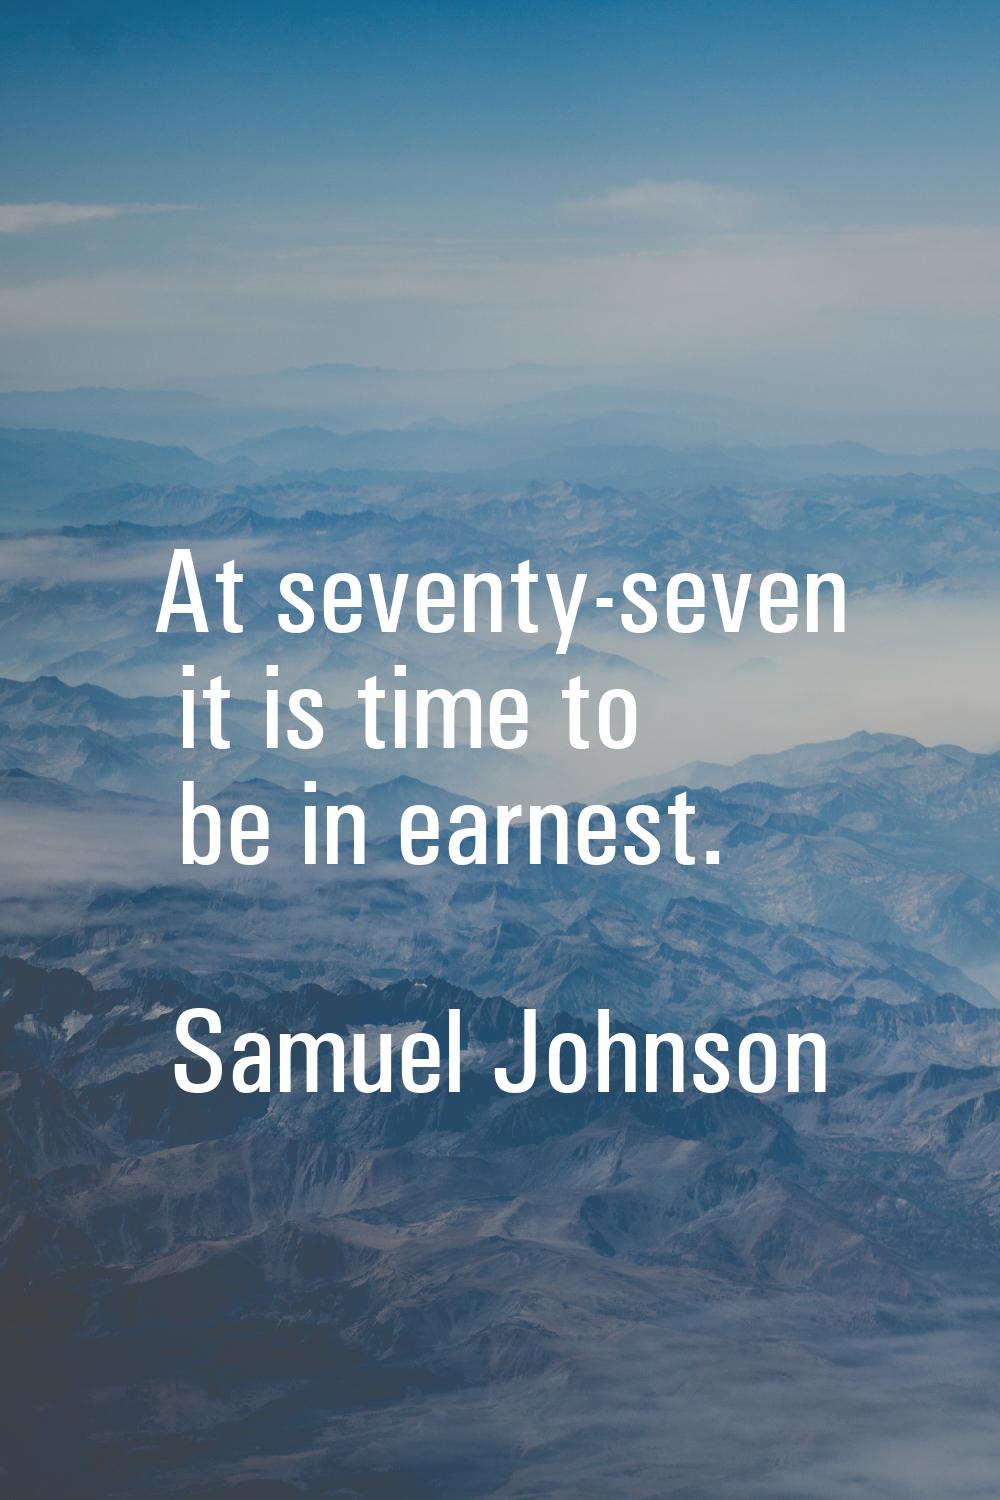 At seventy-seven it is time to be in earnest.